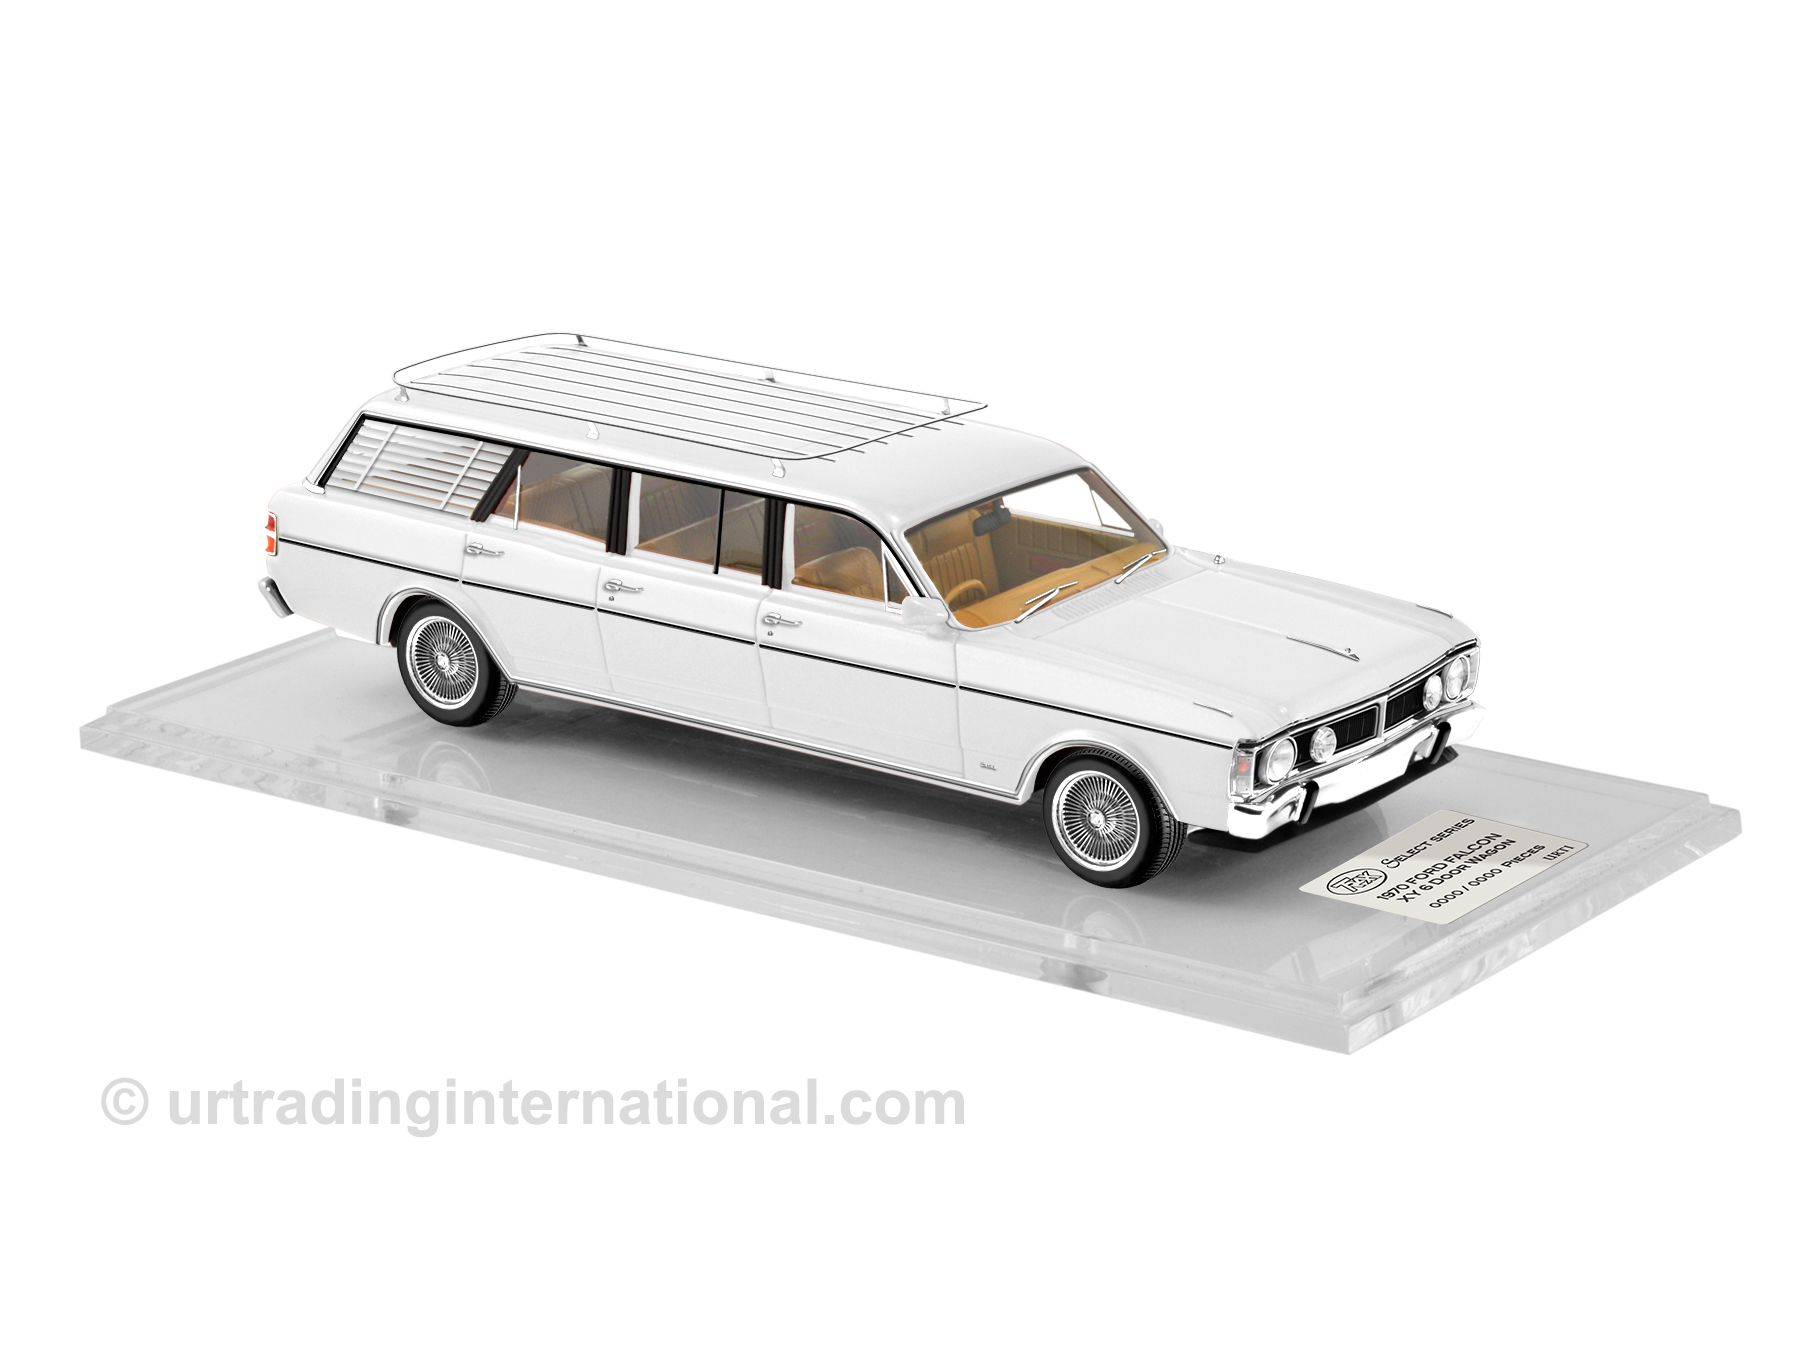 1970 Ford Falcon XY Factory Built 6 Door Wagon – White